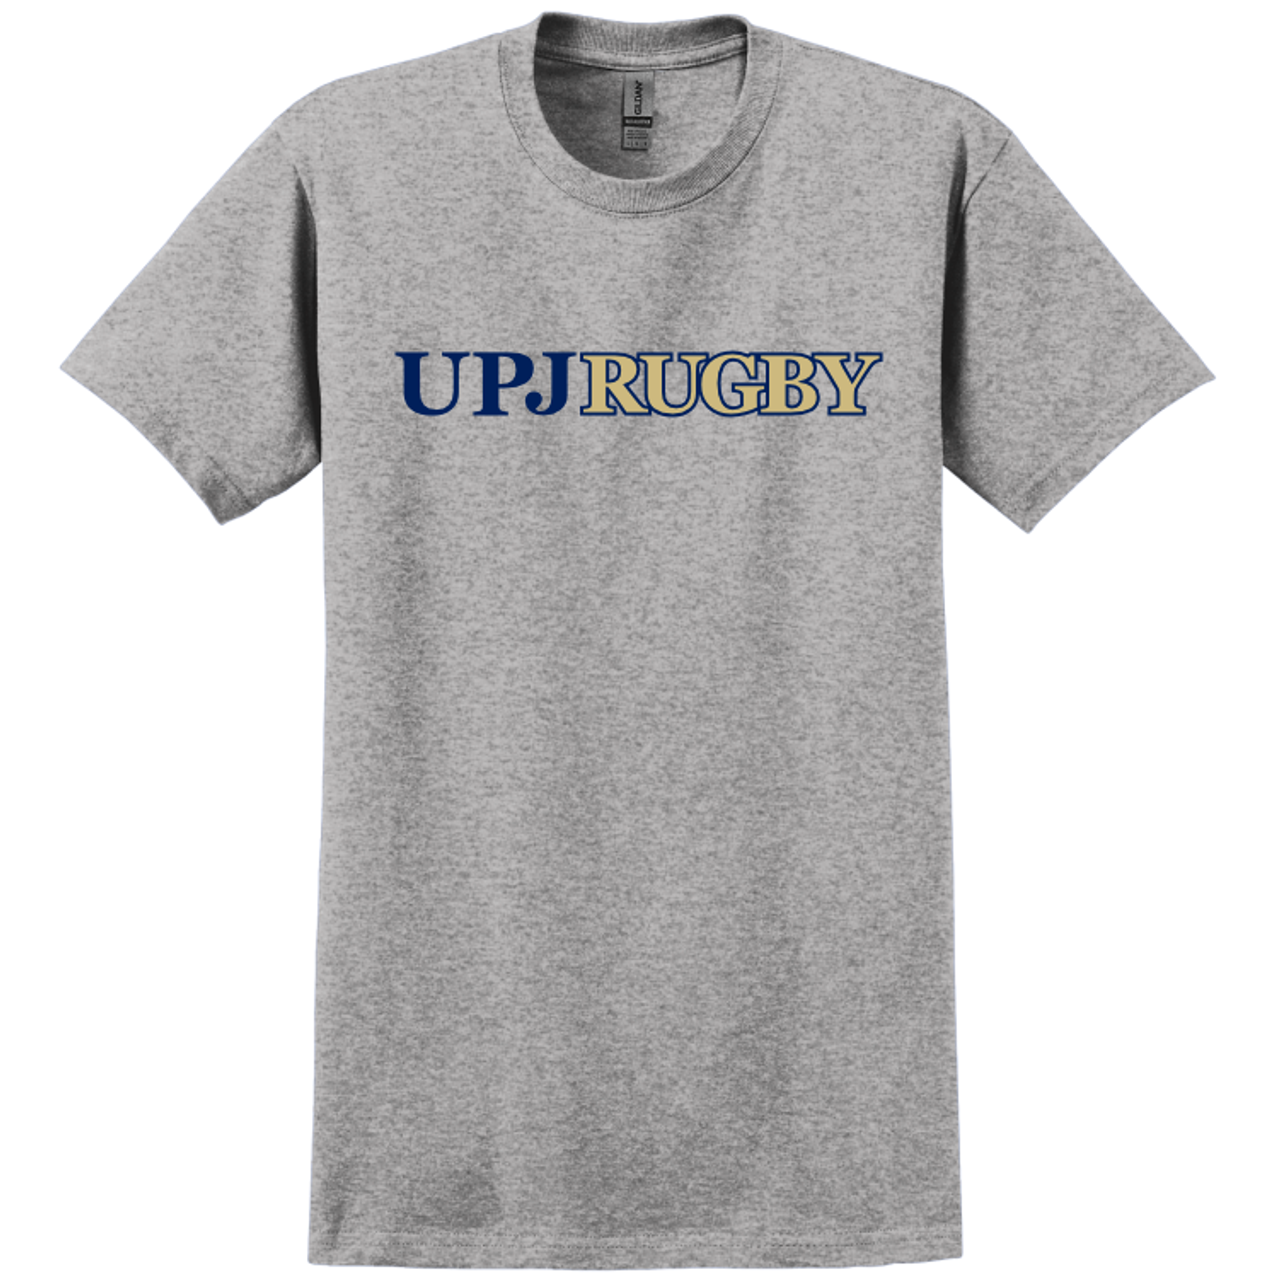 UPJ Rugby Cotton T-Shirt, Sport Gray